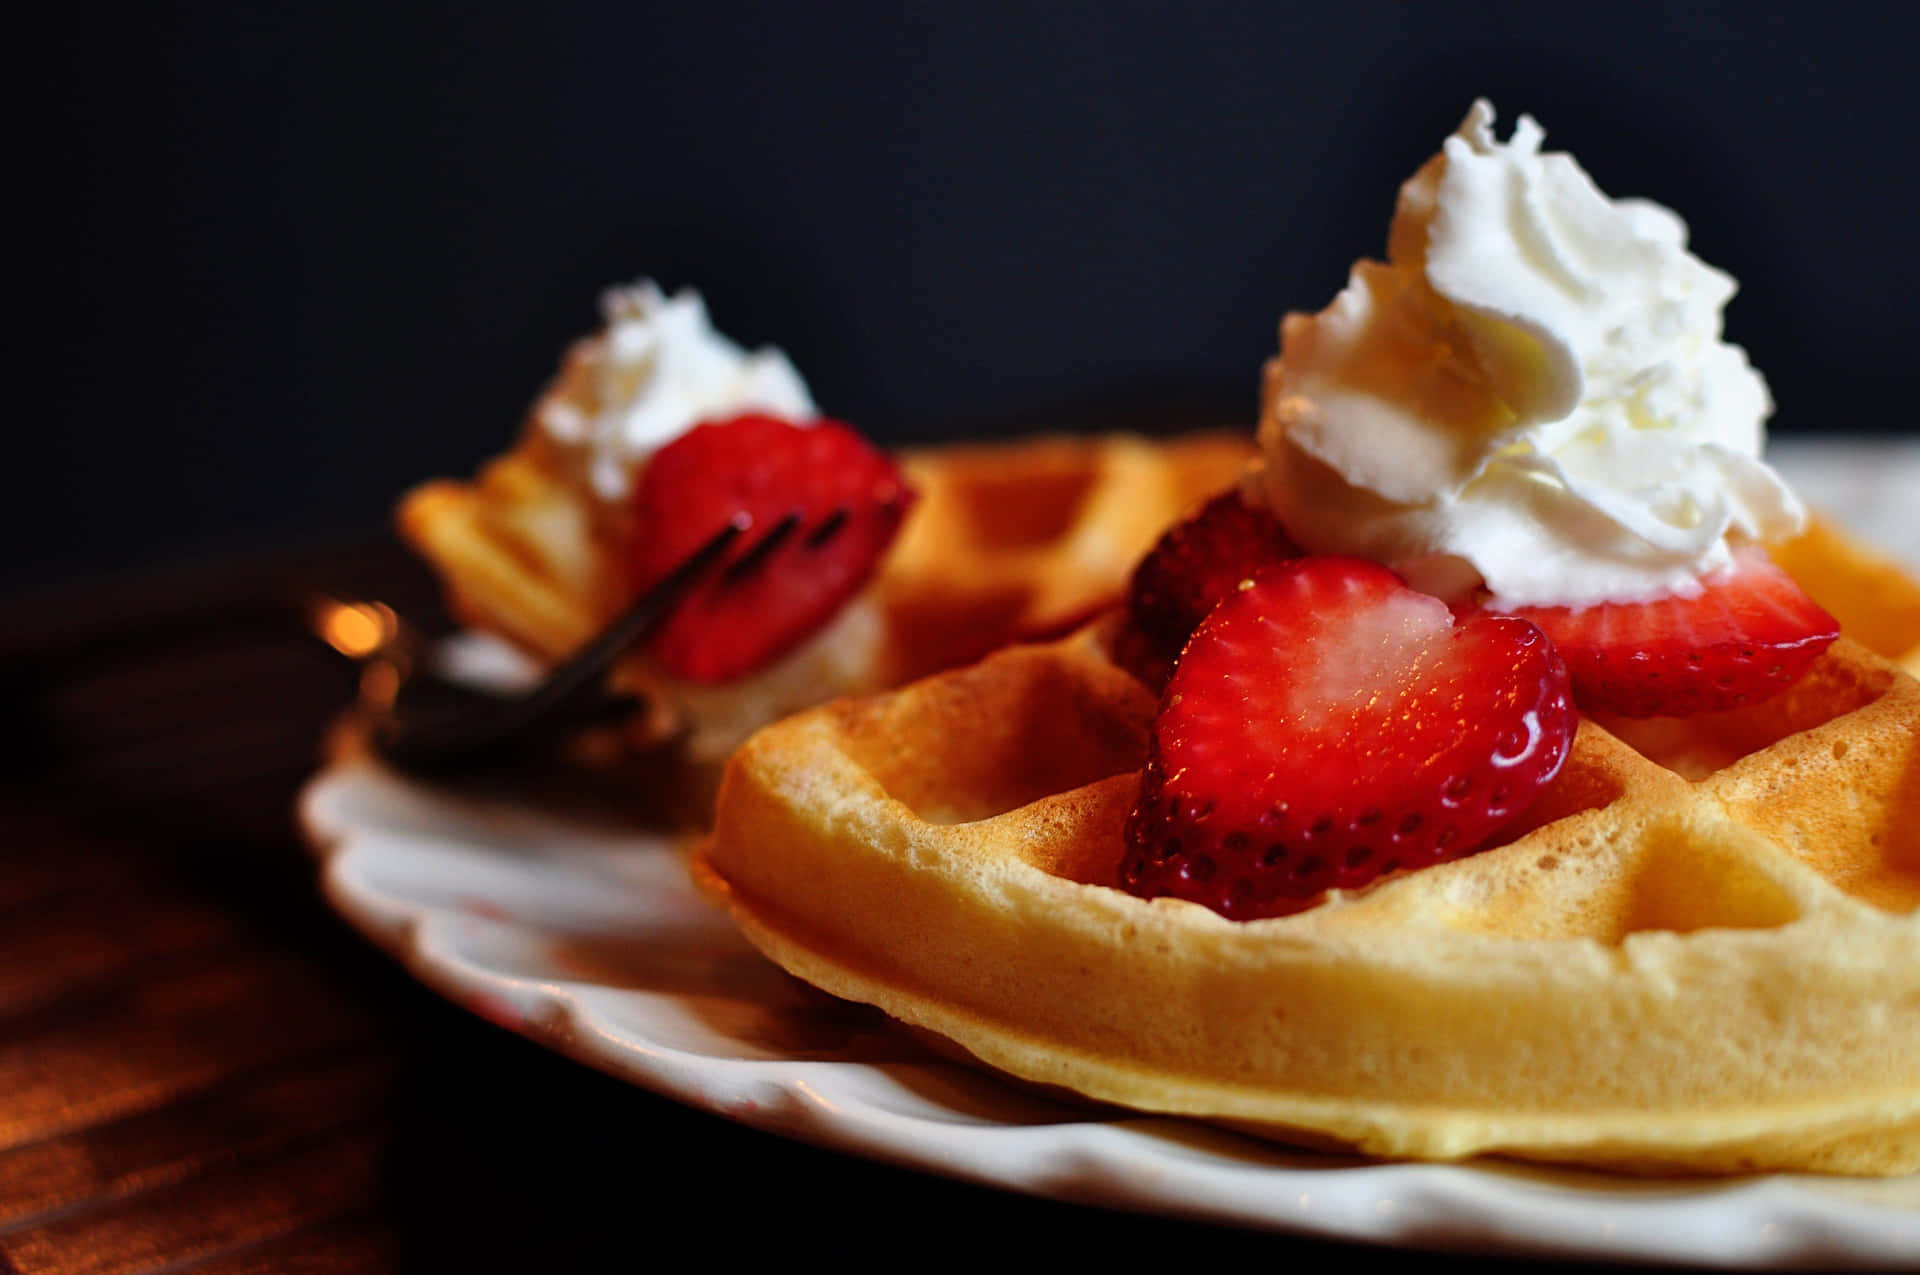 Delicious Golden Waffles Up-close